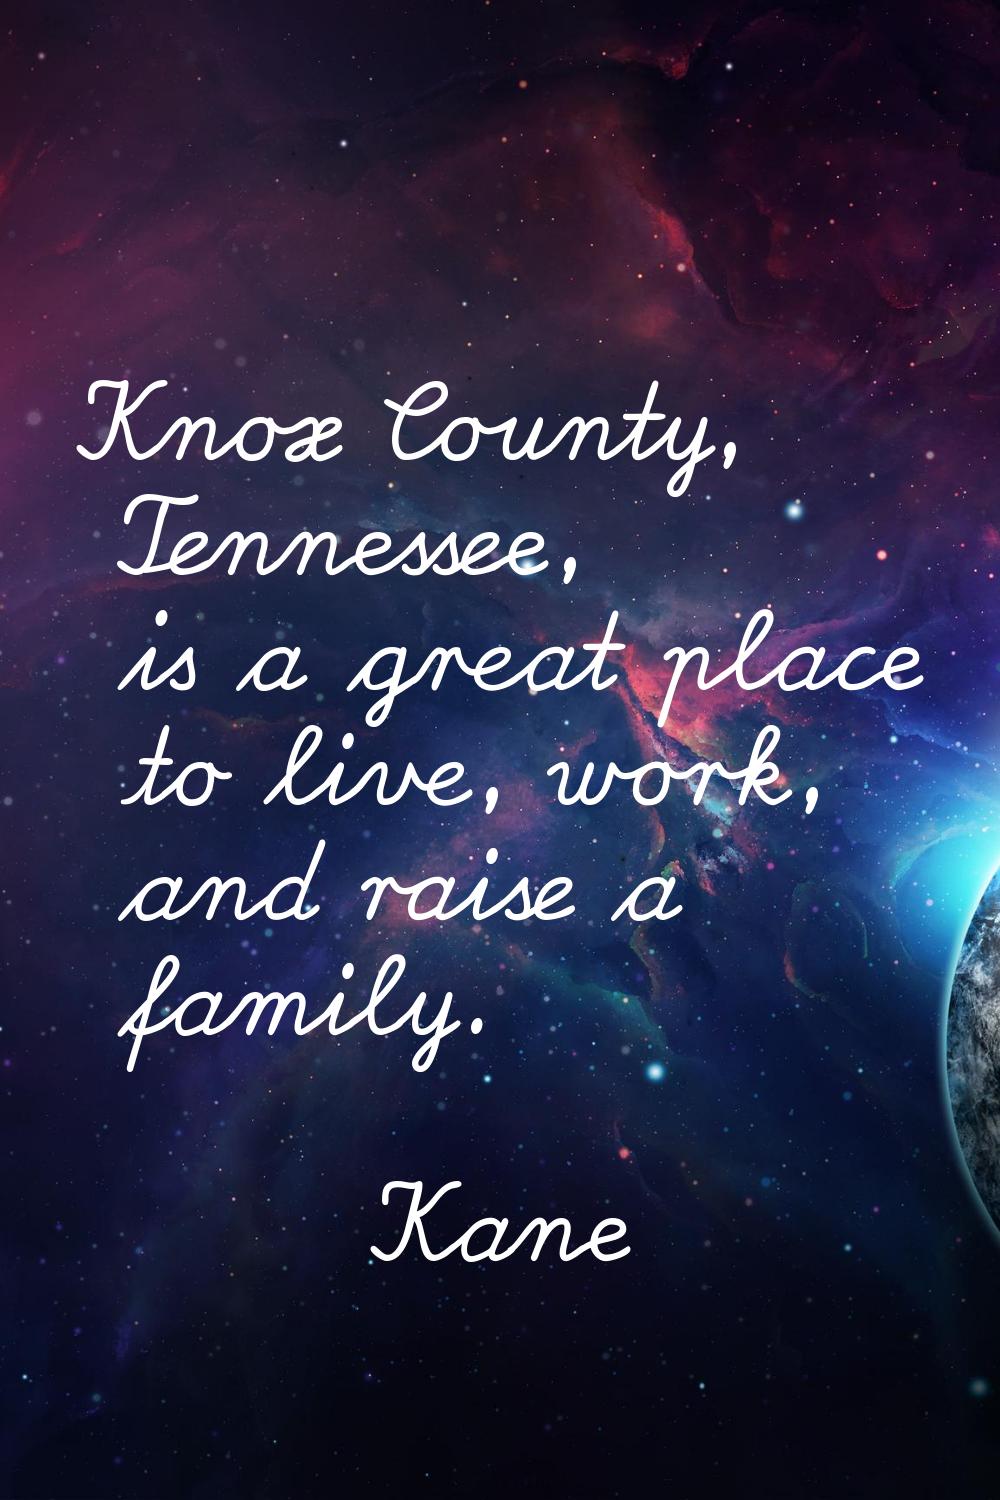 Knox County, Tennessee, is a great place to live, work, and raise a family.